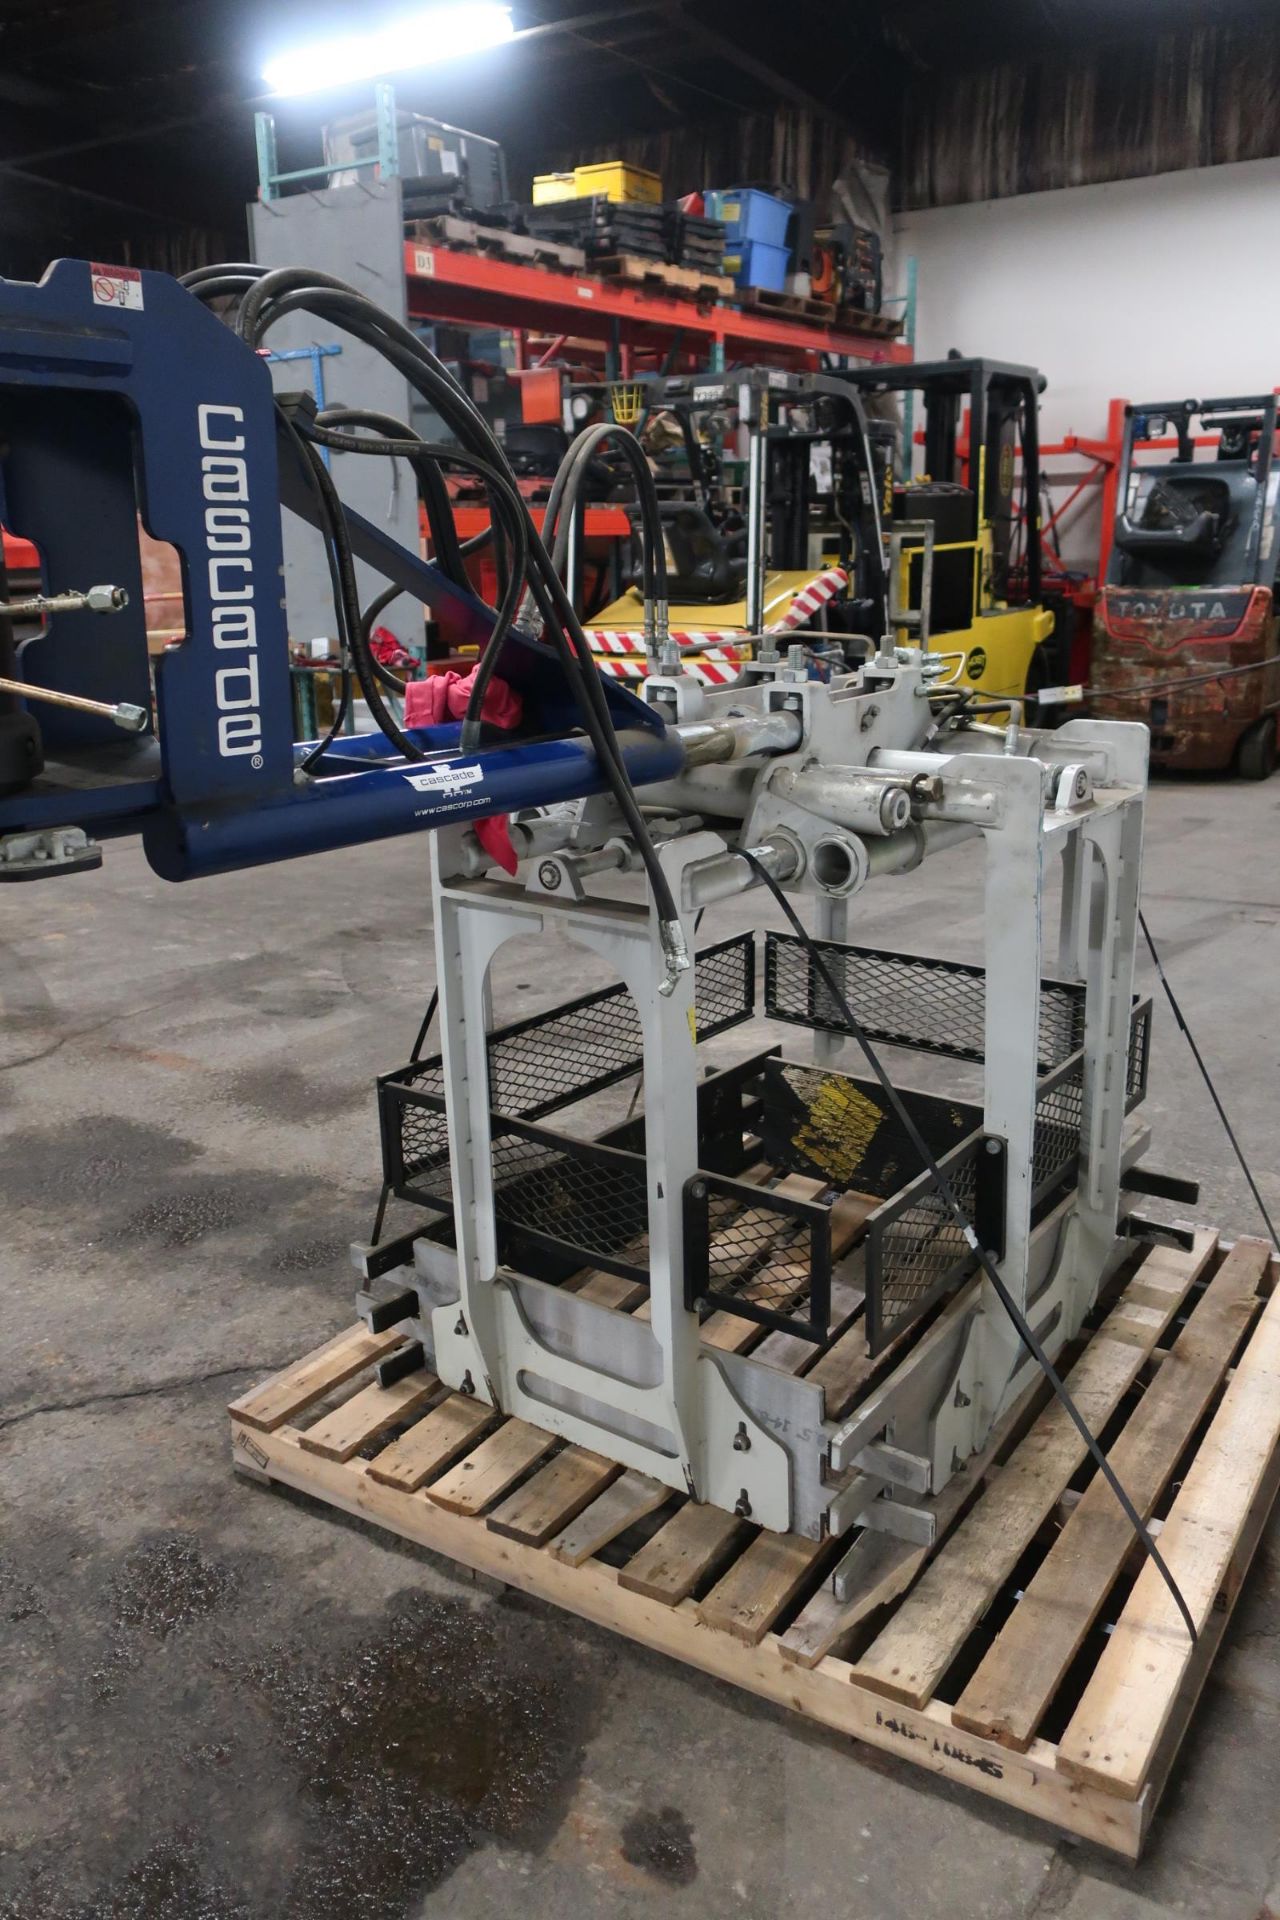 Cascade Box Picker Lifter Forklift Attachment - Mint condition over $60,000 retail cost - Image 3 of 4